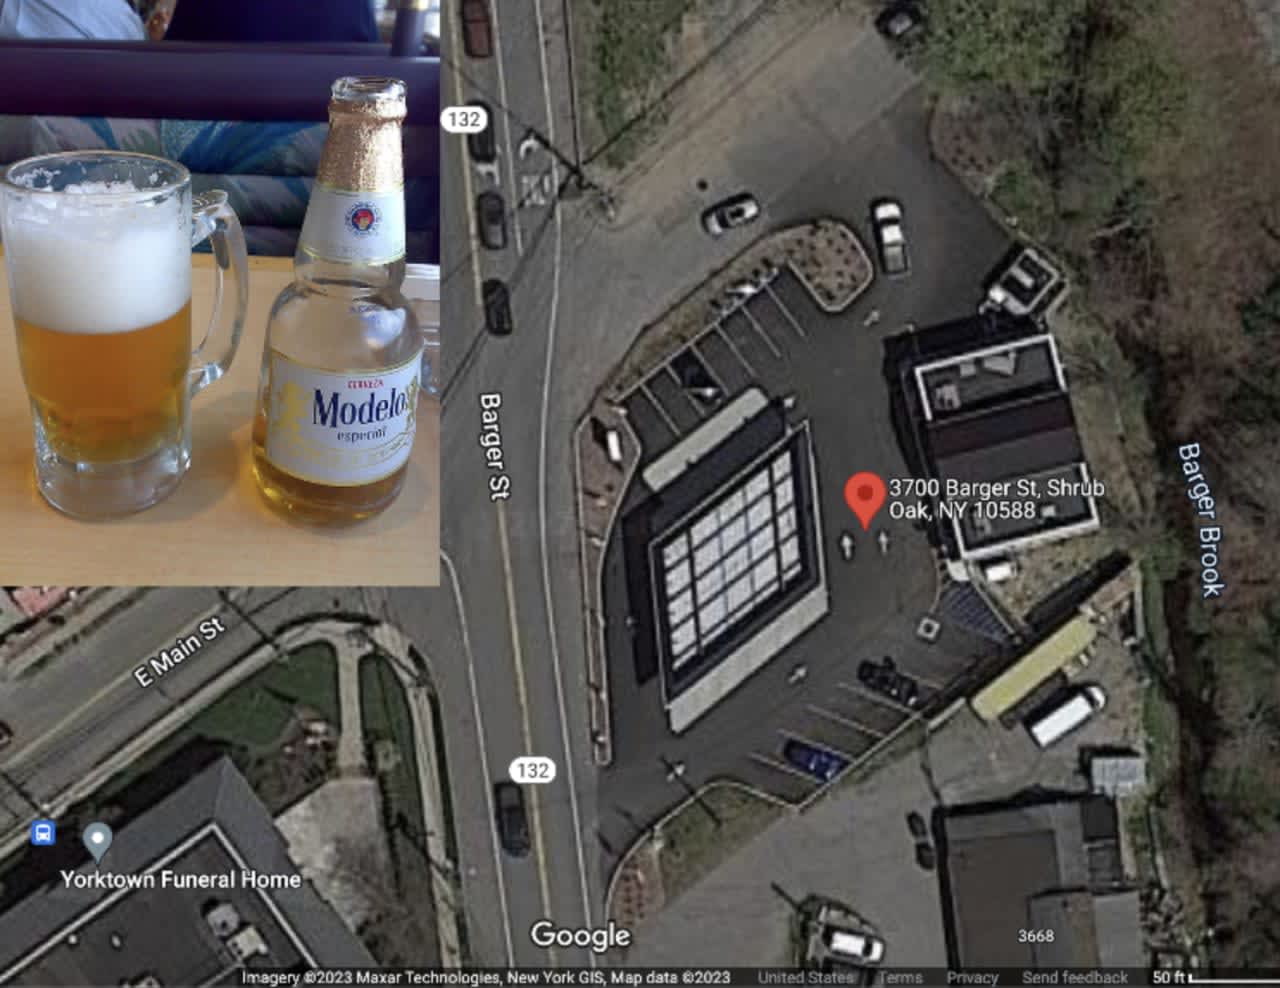 The suspect stole Modelo beer from Coco Farms in Yorktown, located at 3700 Barger St. (Route 132).